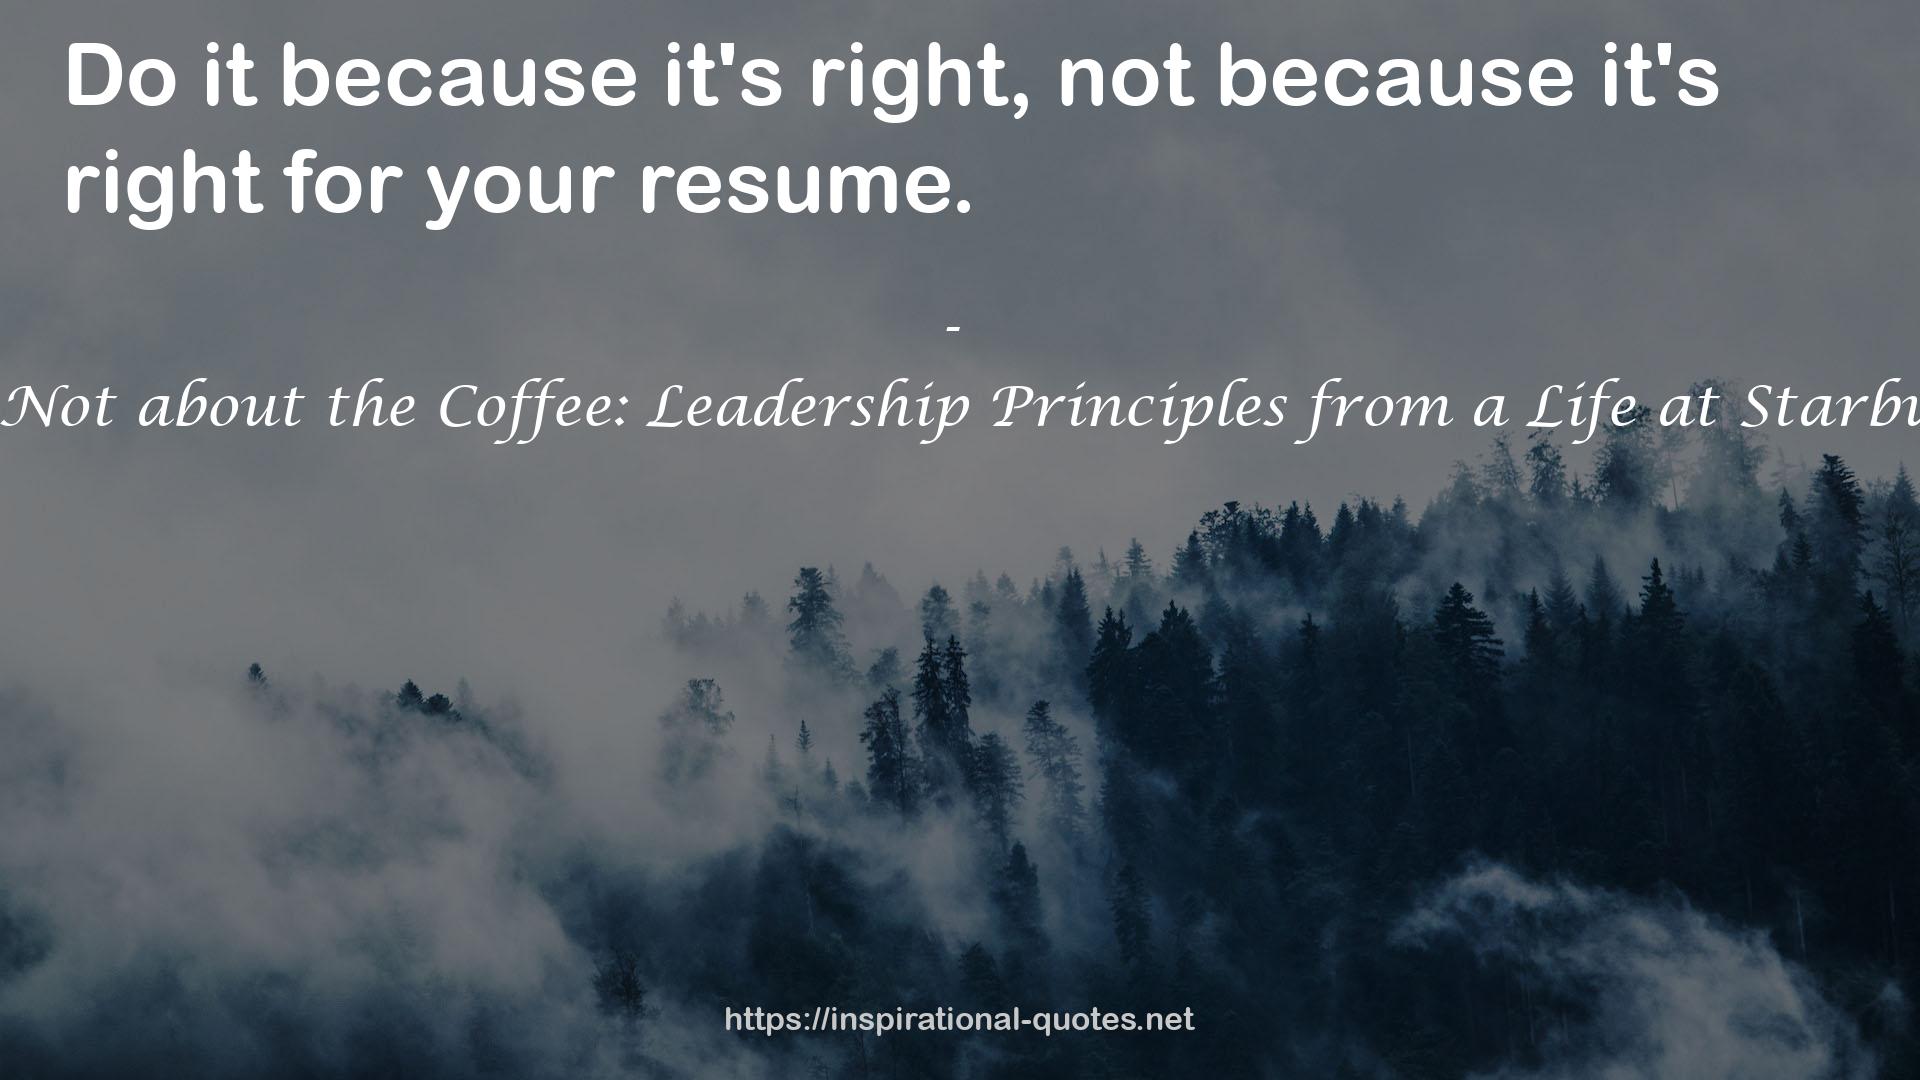 It's Not about the Coffee: Leadership Principles from a Life at Starbucks QUOTES